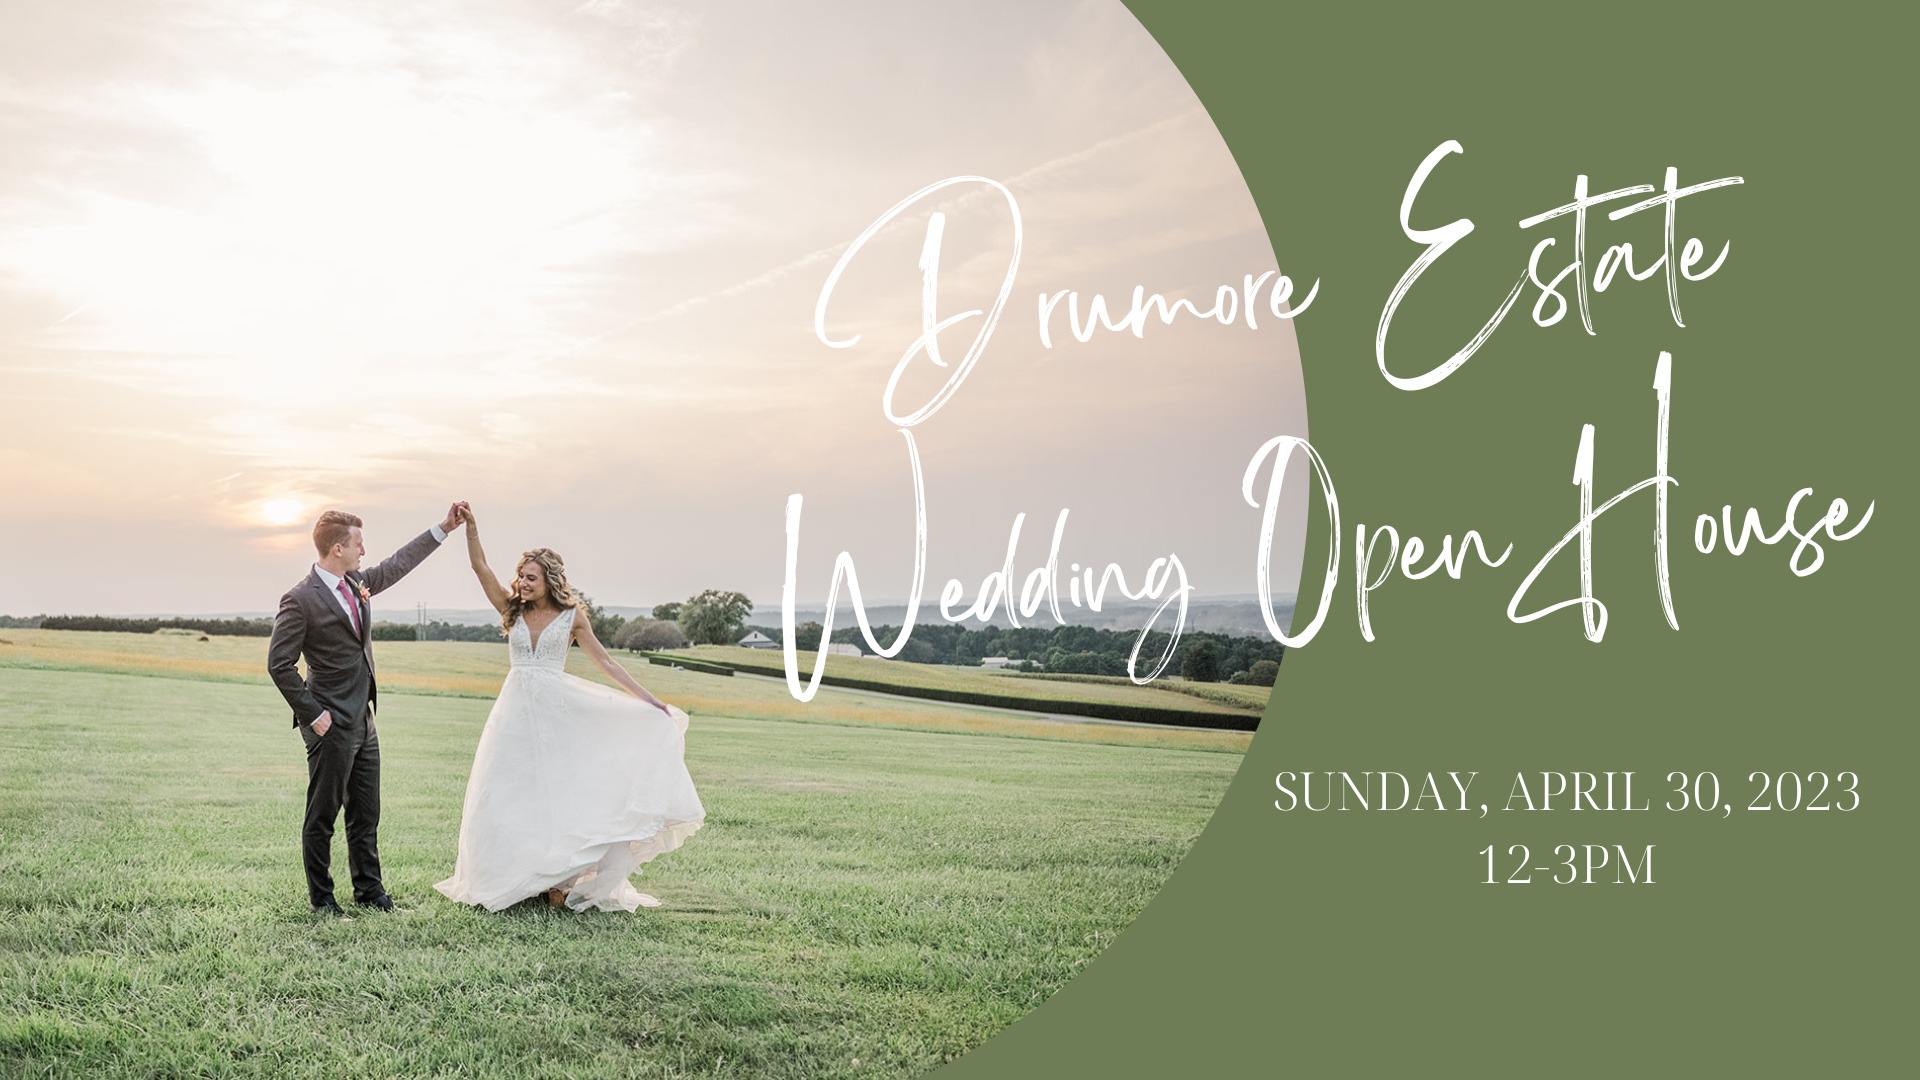 Copy of Open Facebook Event Cover